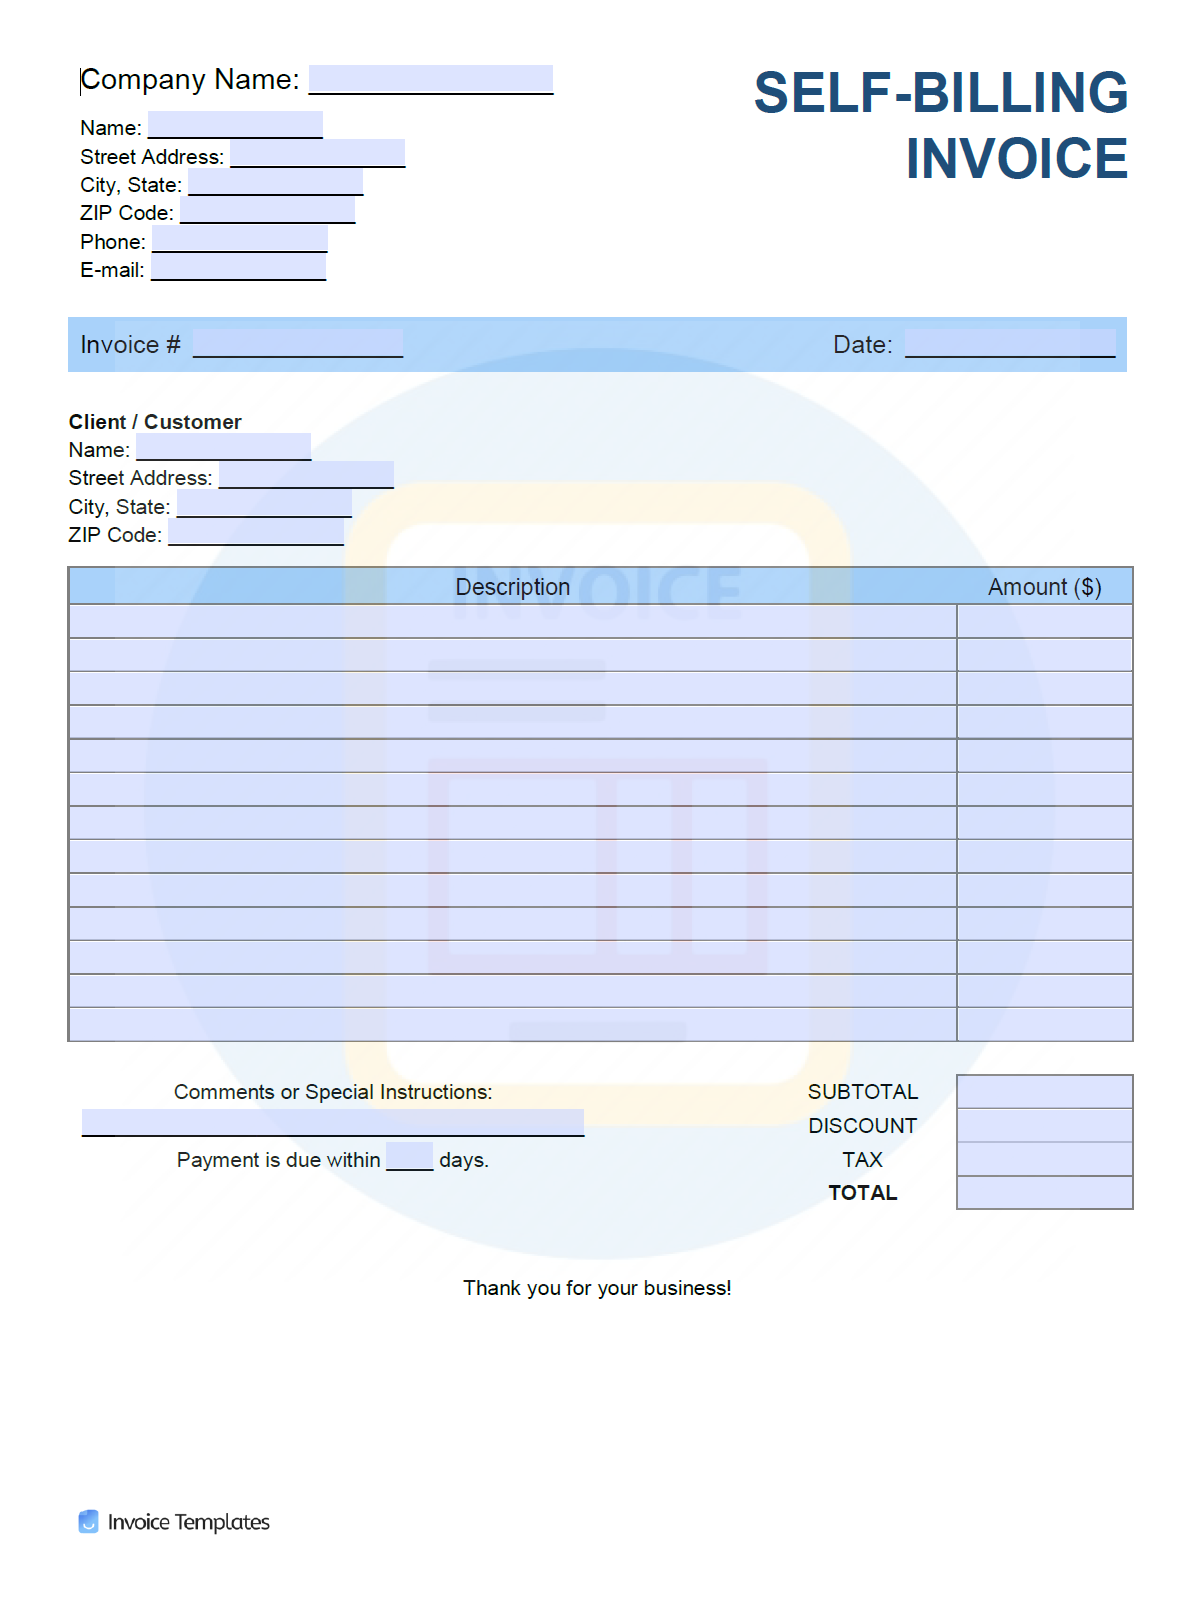 Bill Invoice Template from invoicetemplates.com